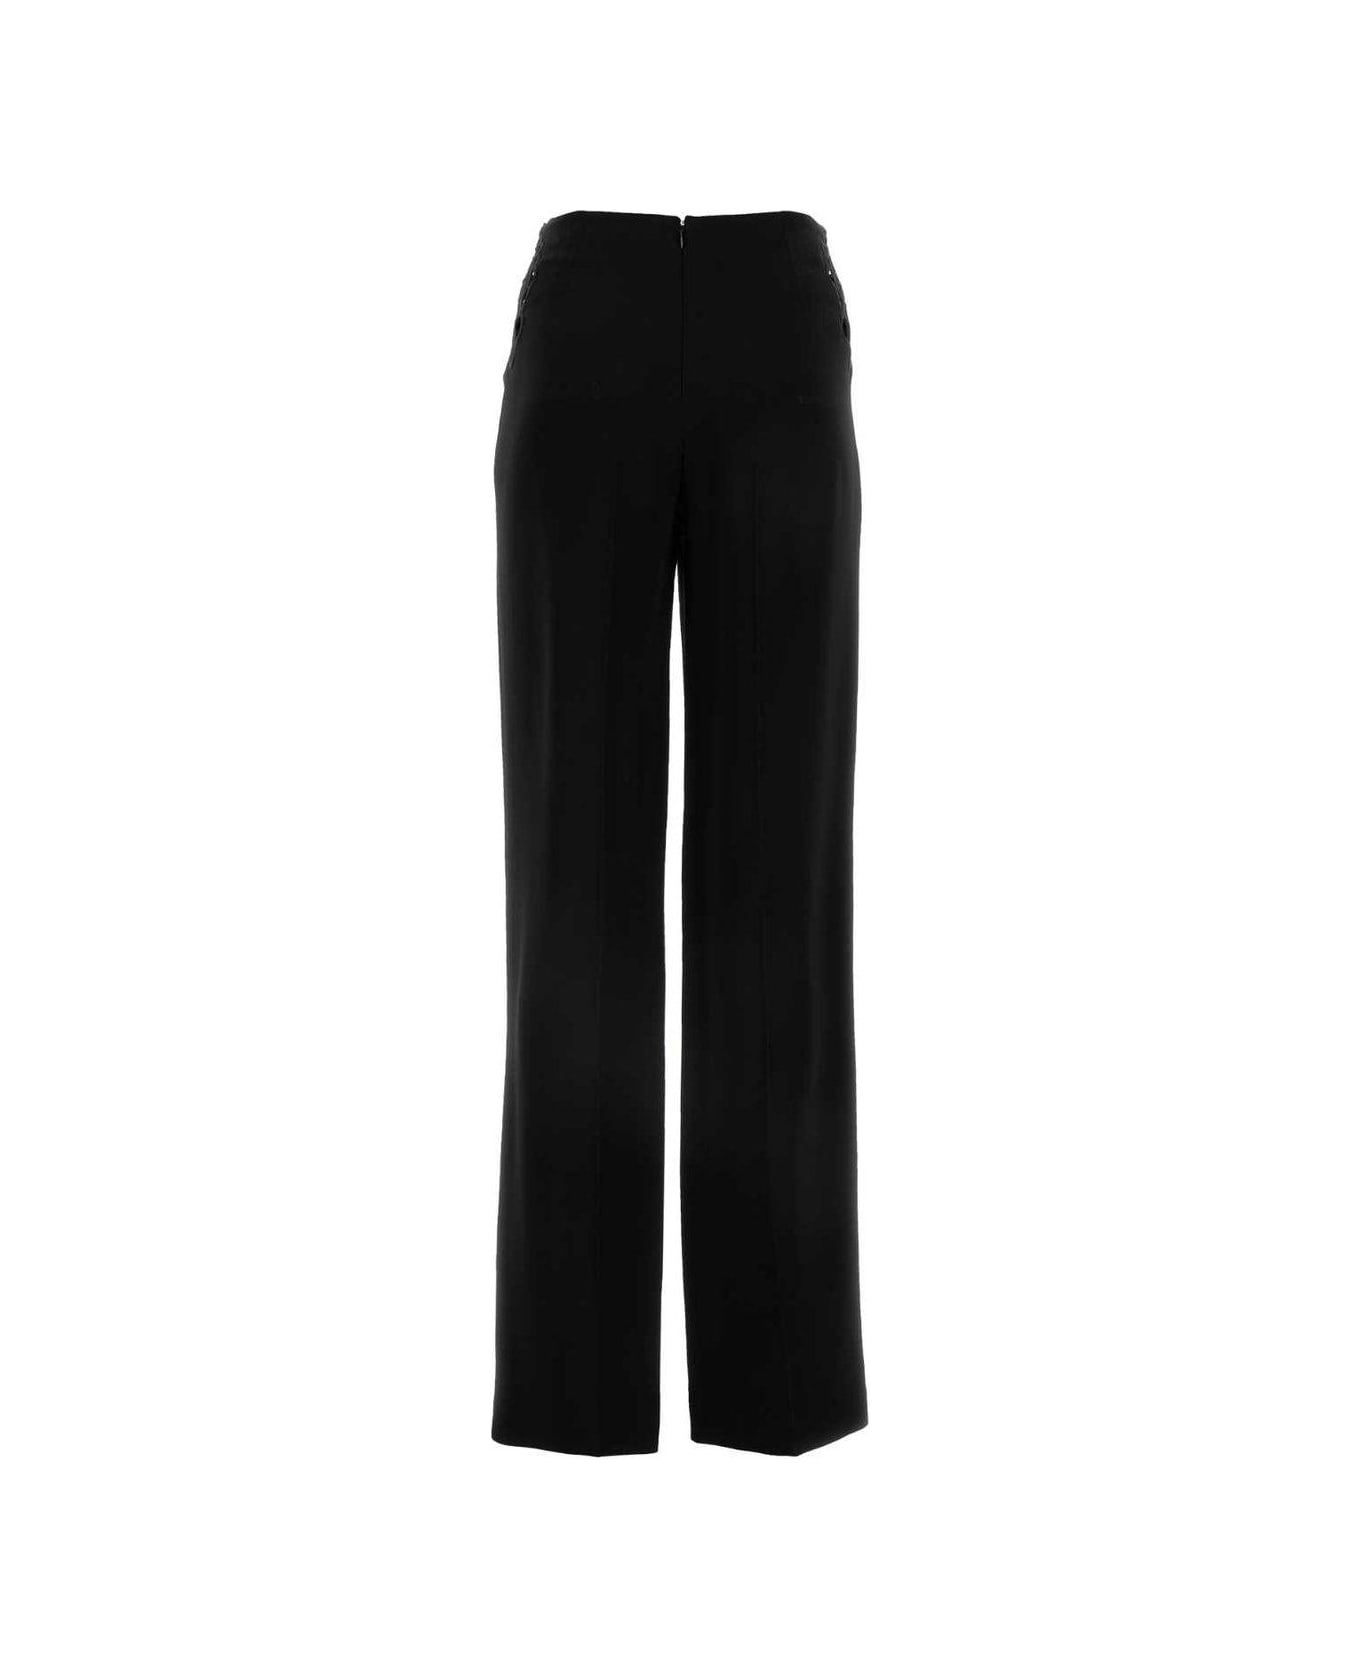 Stella McCartney Broderie-anglaise Tailored Trousers - Black